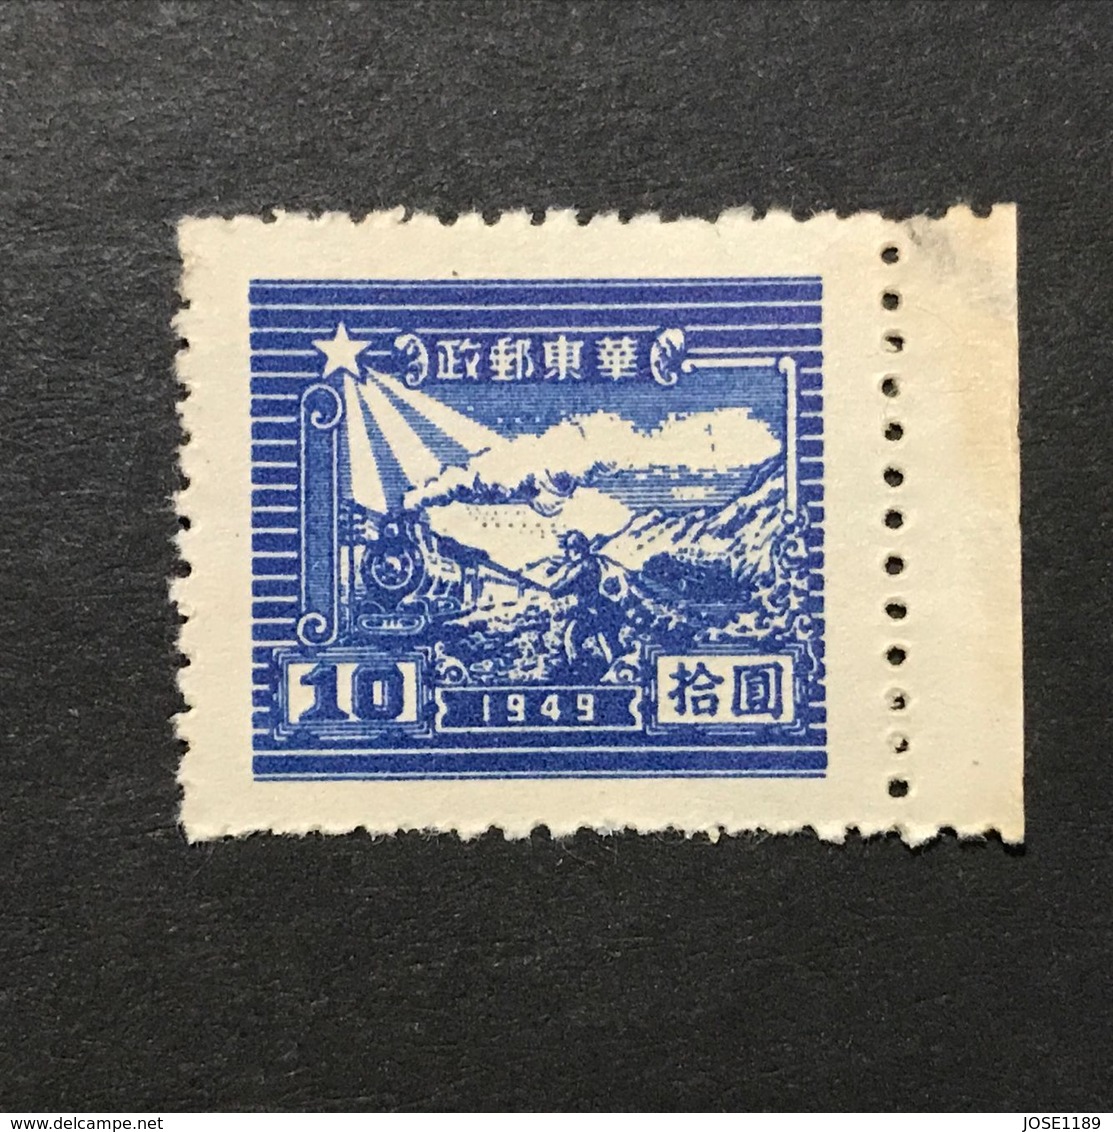 ◆◆◆CHINA 1949   2nd  Print Traffic Means Design Issue   $10   NEW  AA6479 - Western-China 1949-50